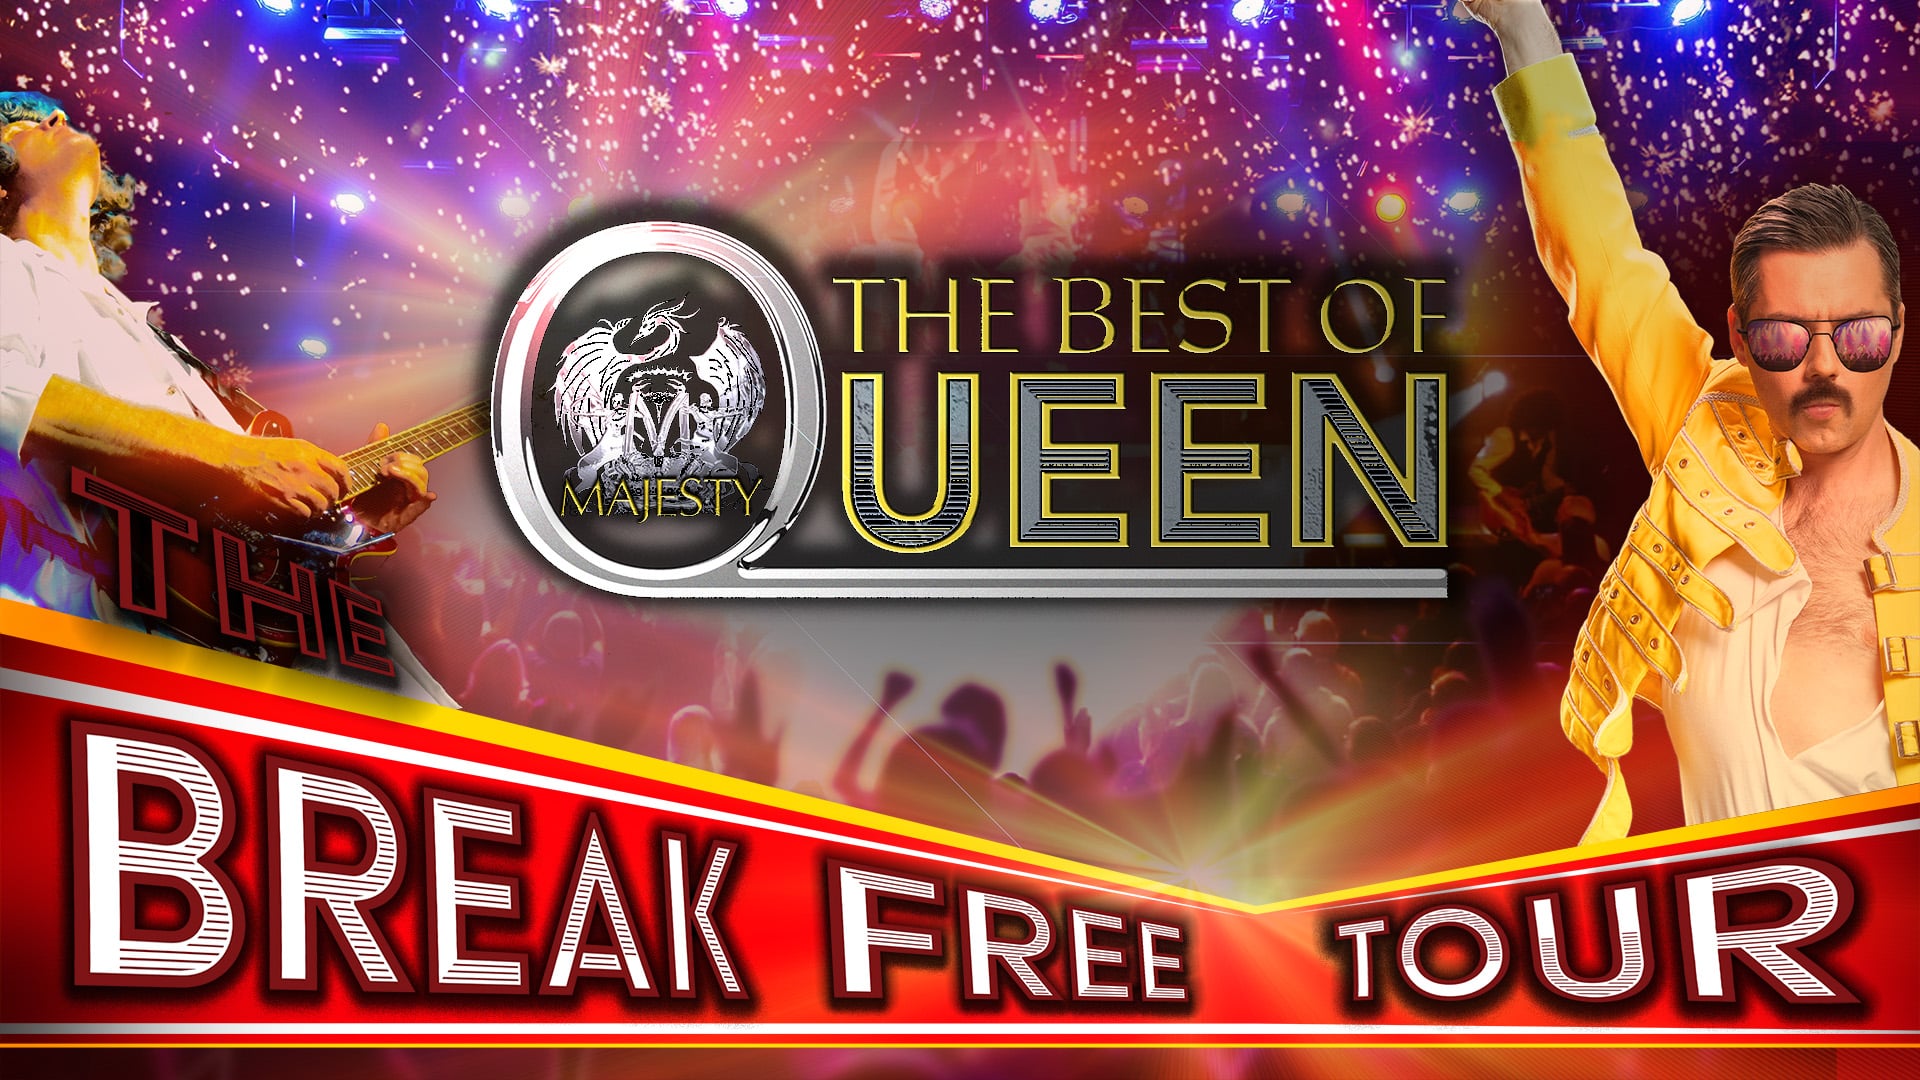 The Best of Queen - Break Free Tour - Colourful, energetic, rockin' image with Freddie Mercury impersonator and electric guitarist